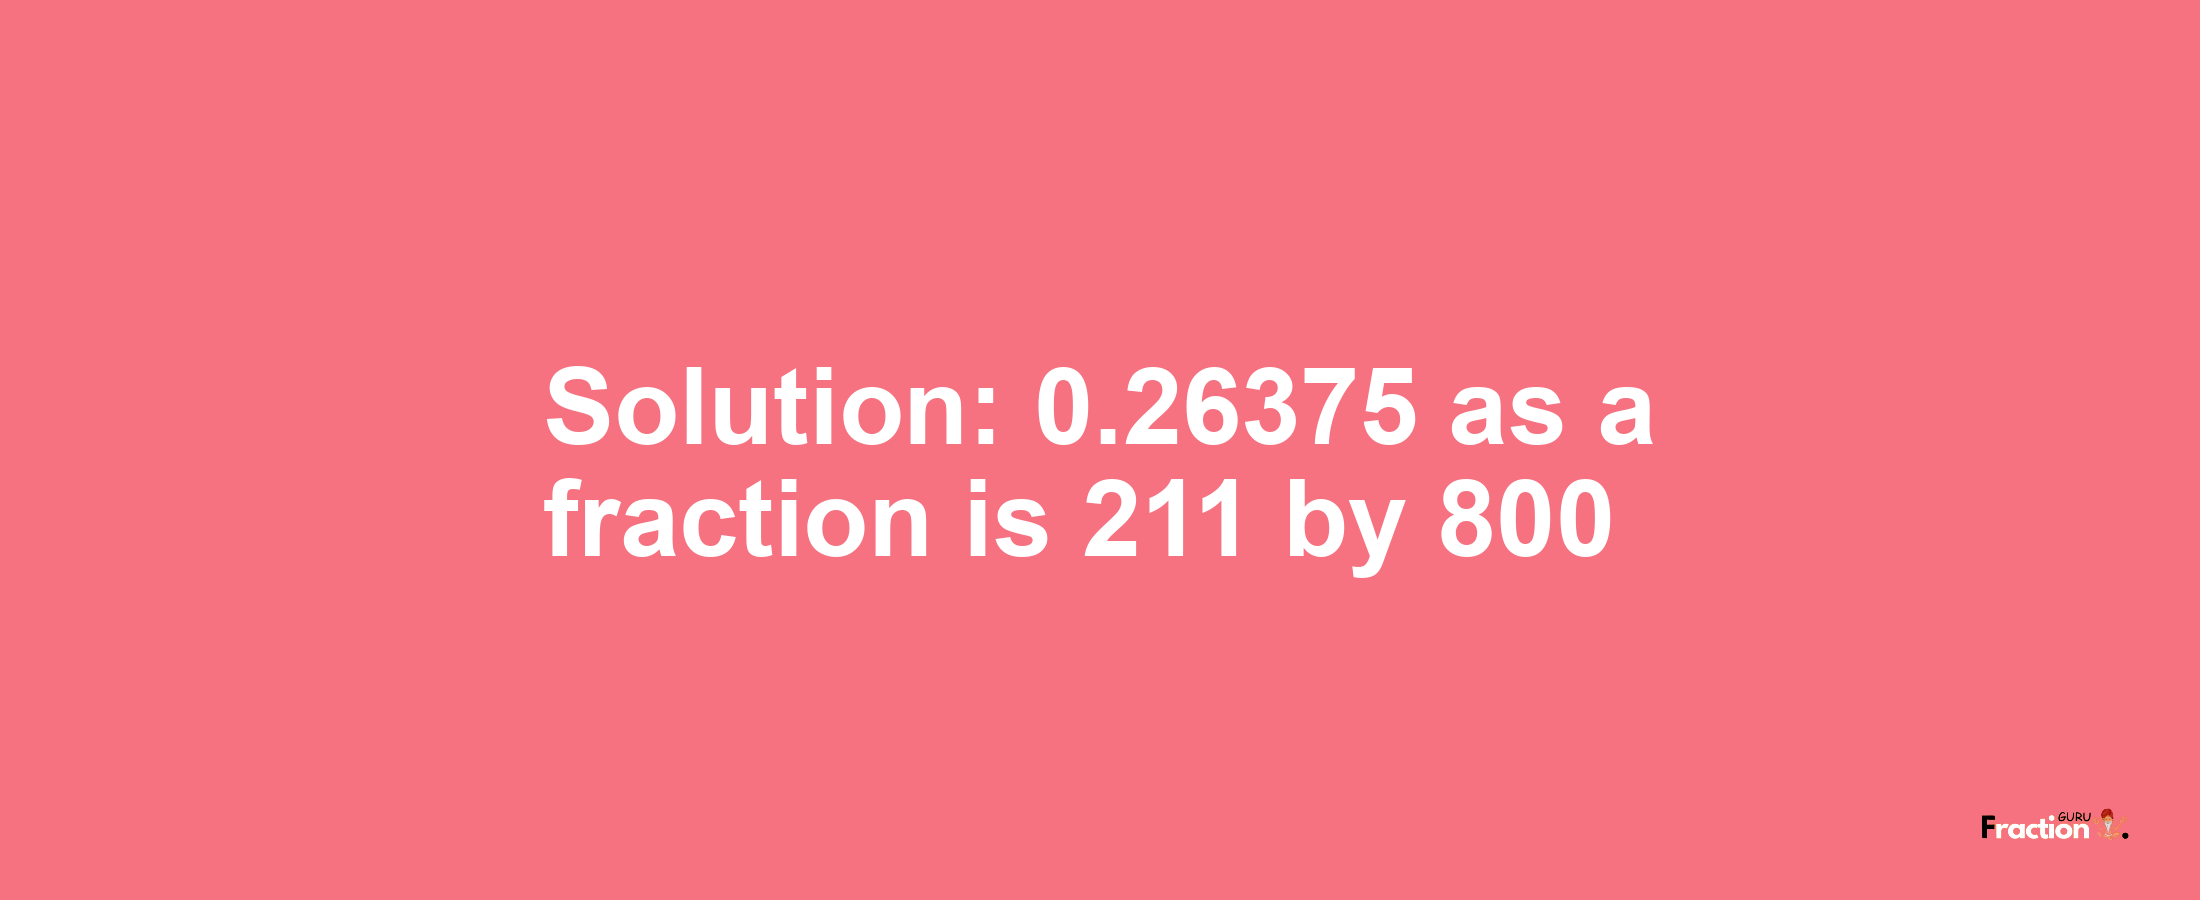 Solution:0.26375 as a fraction is 211/800